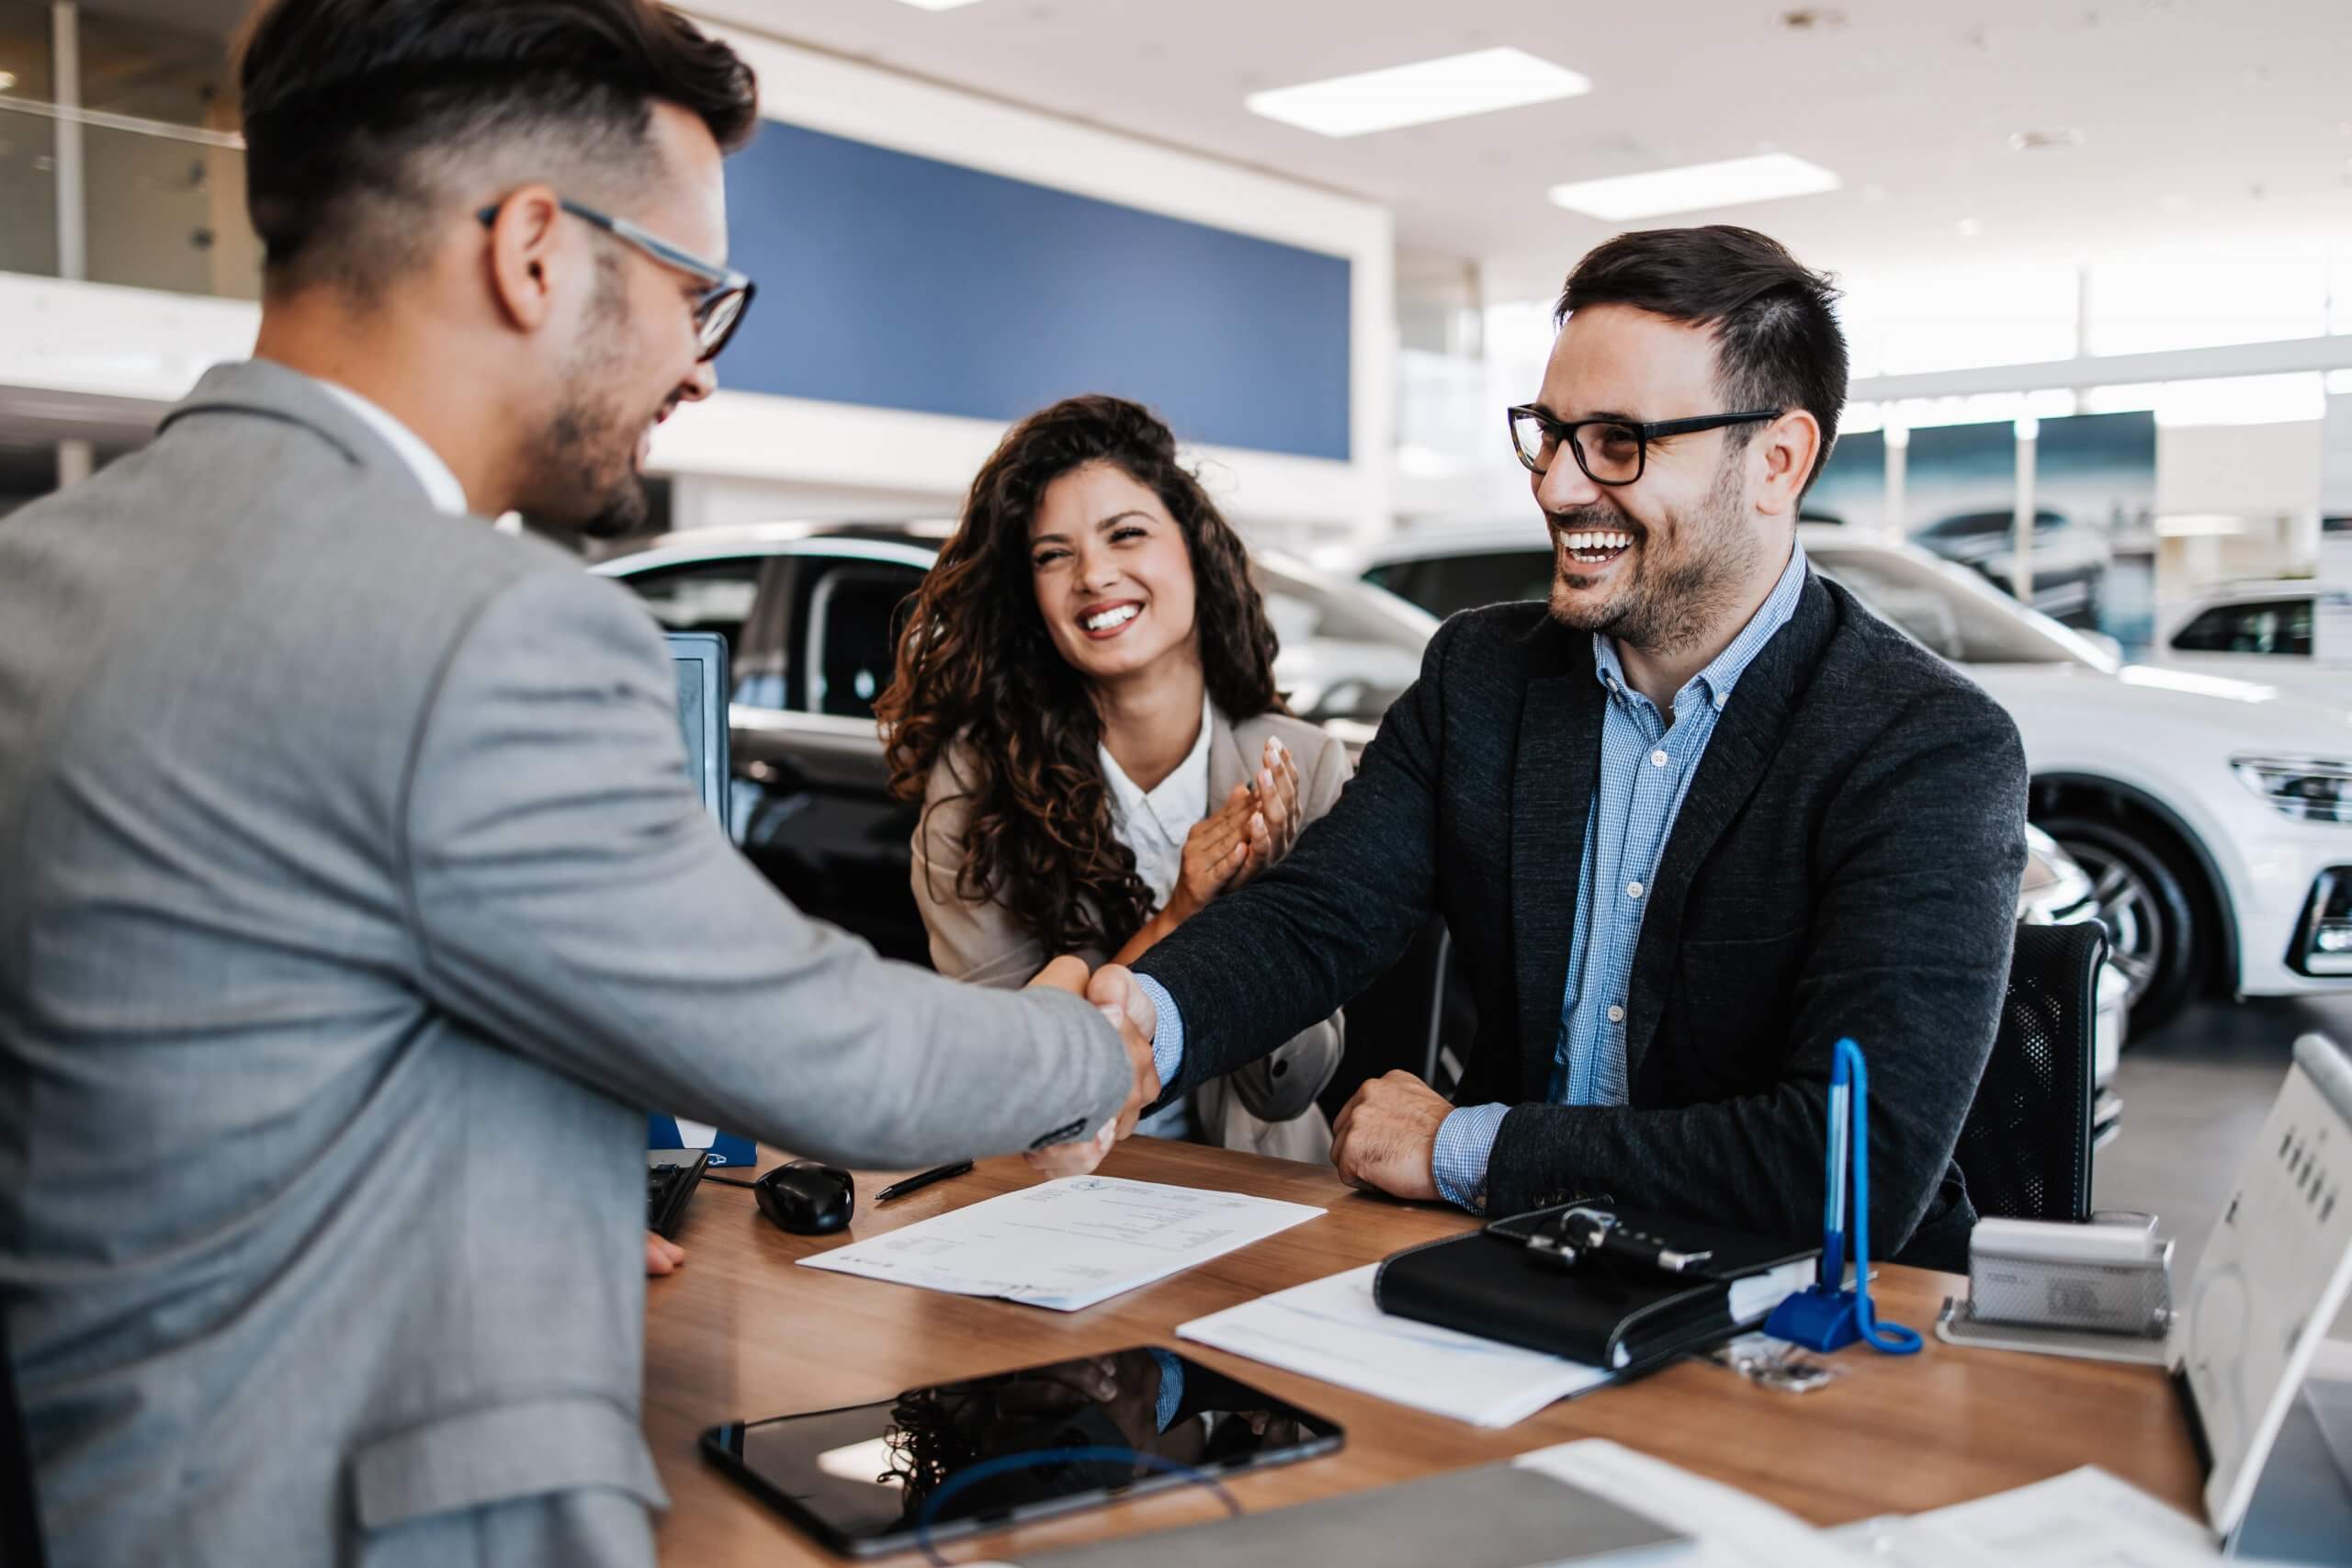 Customers buying a new car and smiling while shaking hands